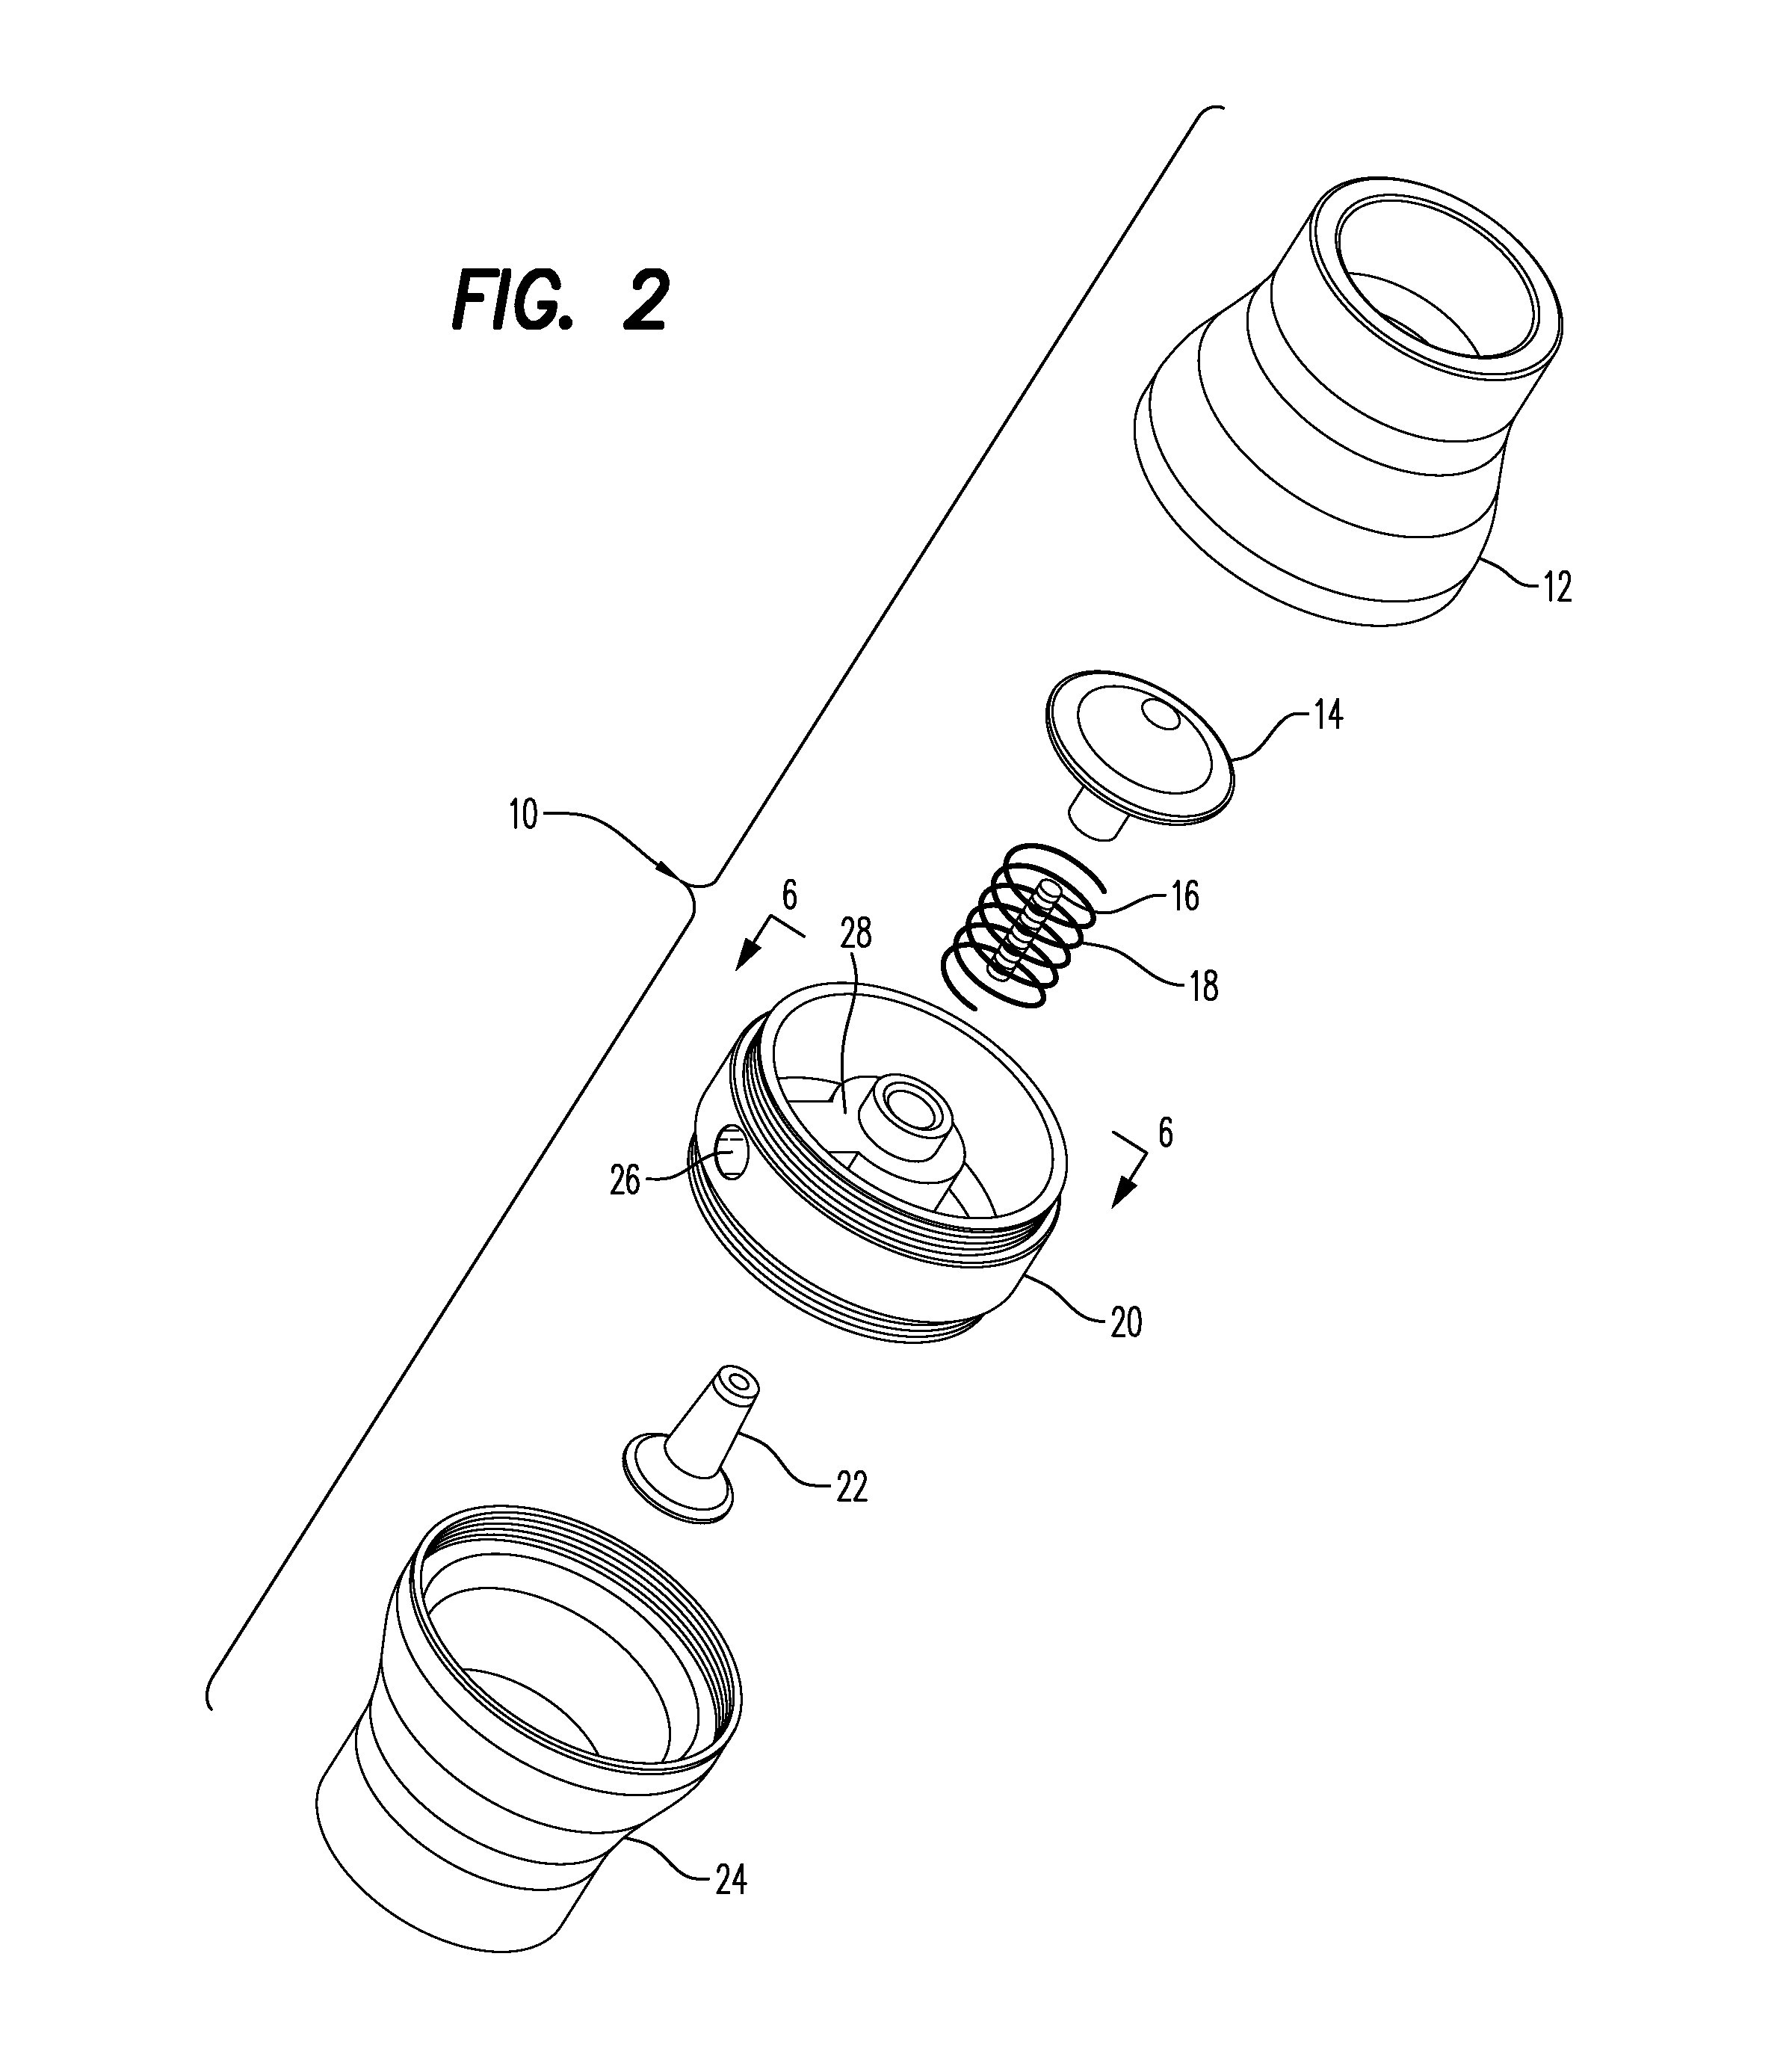 Secondary Fuel Premixing Controller for an Air Intake Manifold of a Combustion Engine